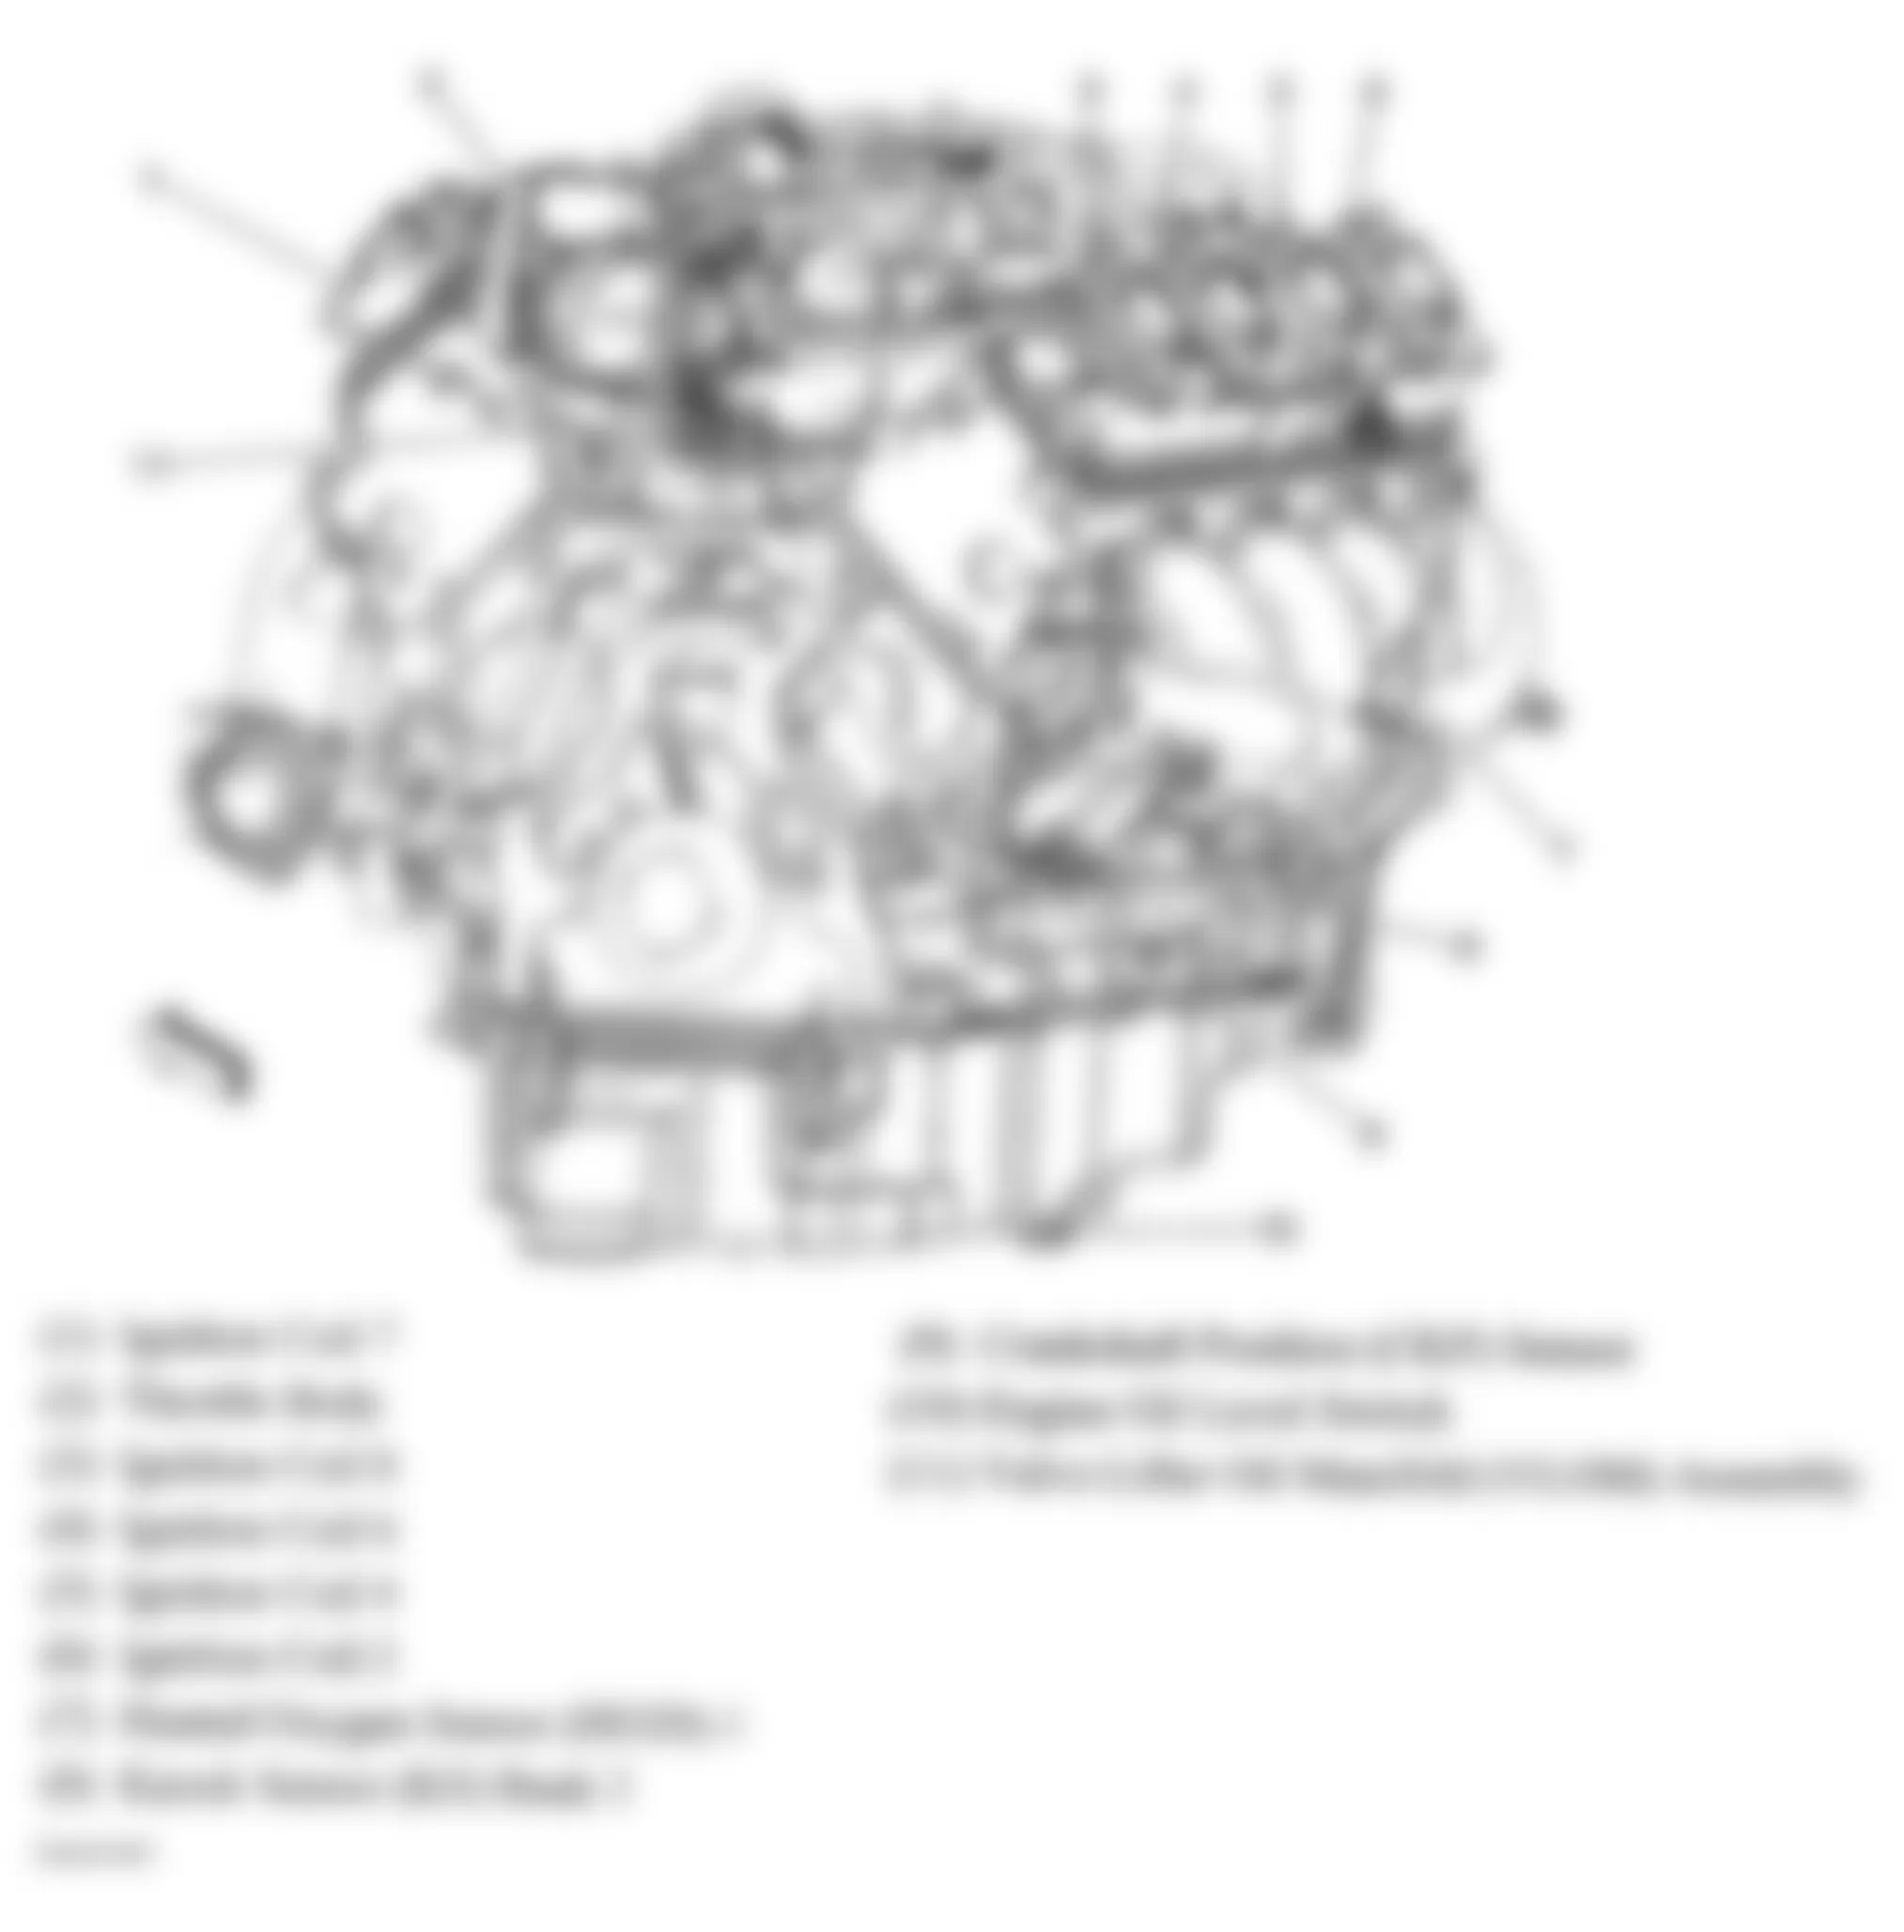 Chevrolet Impala LT 2006 - Component Locations -  Rear Of Engine (5.3L)